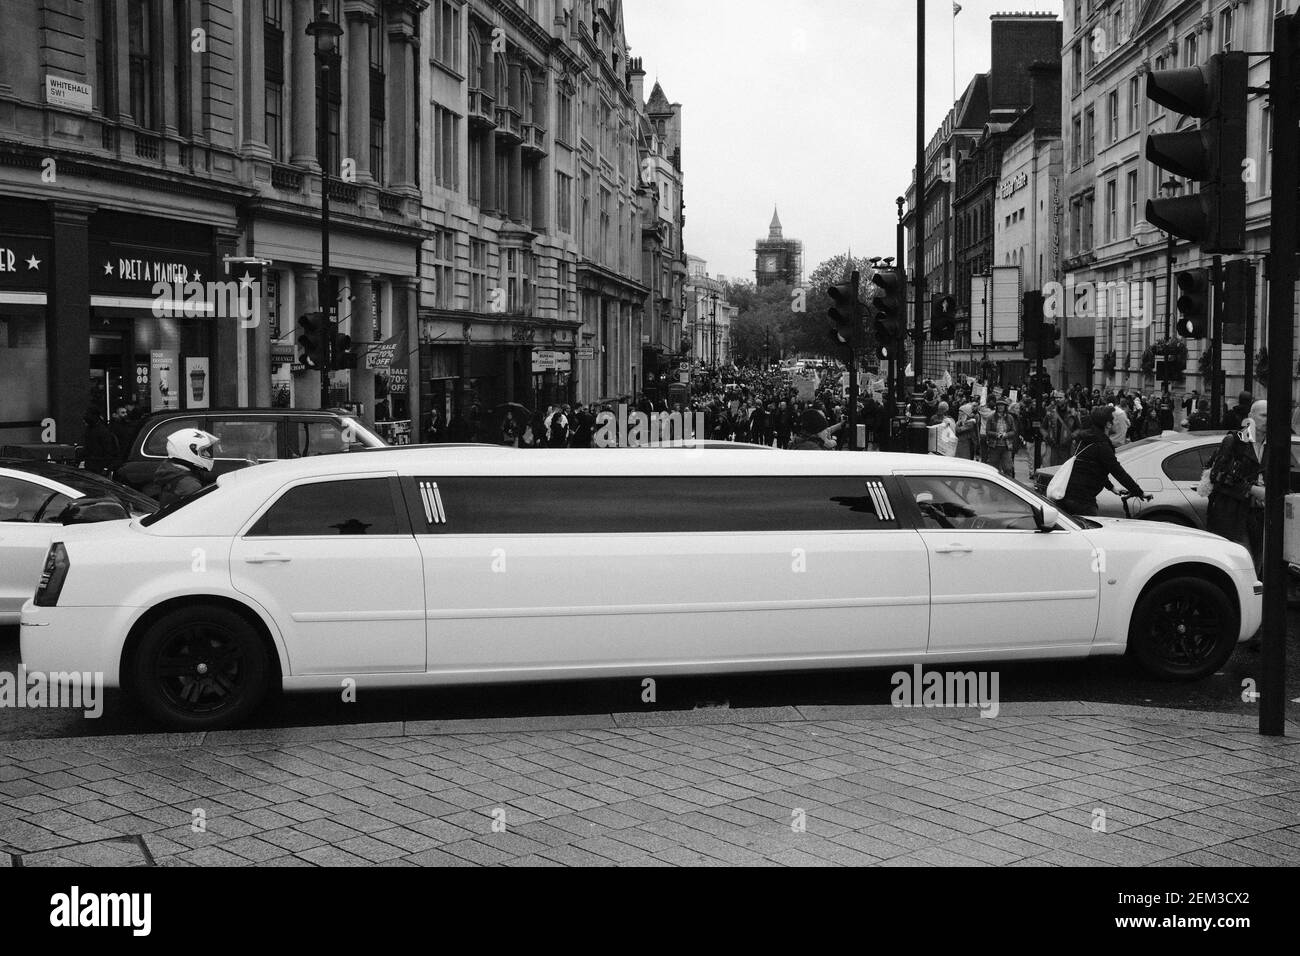 LONDON - 24TH OCTOBER 2020: A white stretched limousine driving past Trafalgar Square in London. Stock Photo